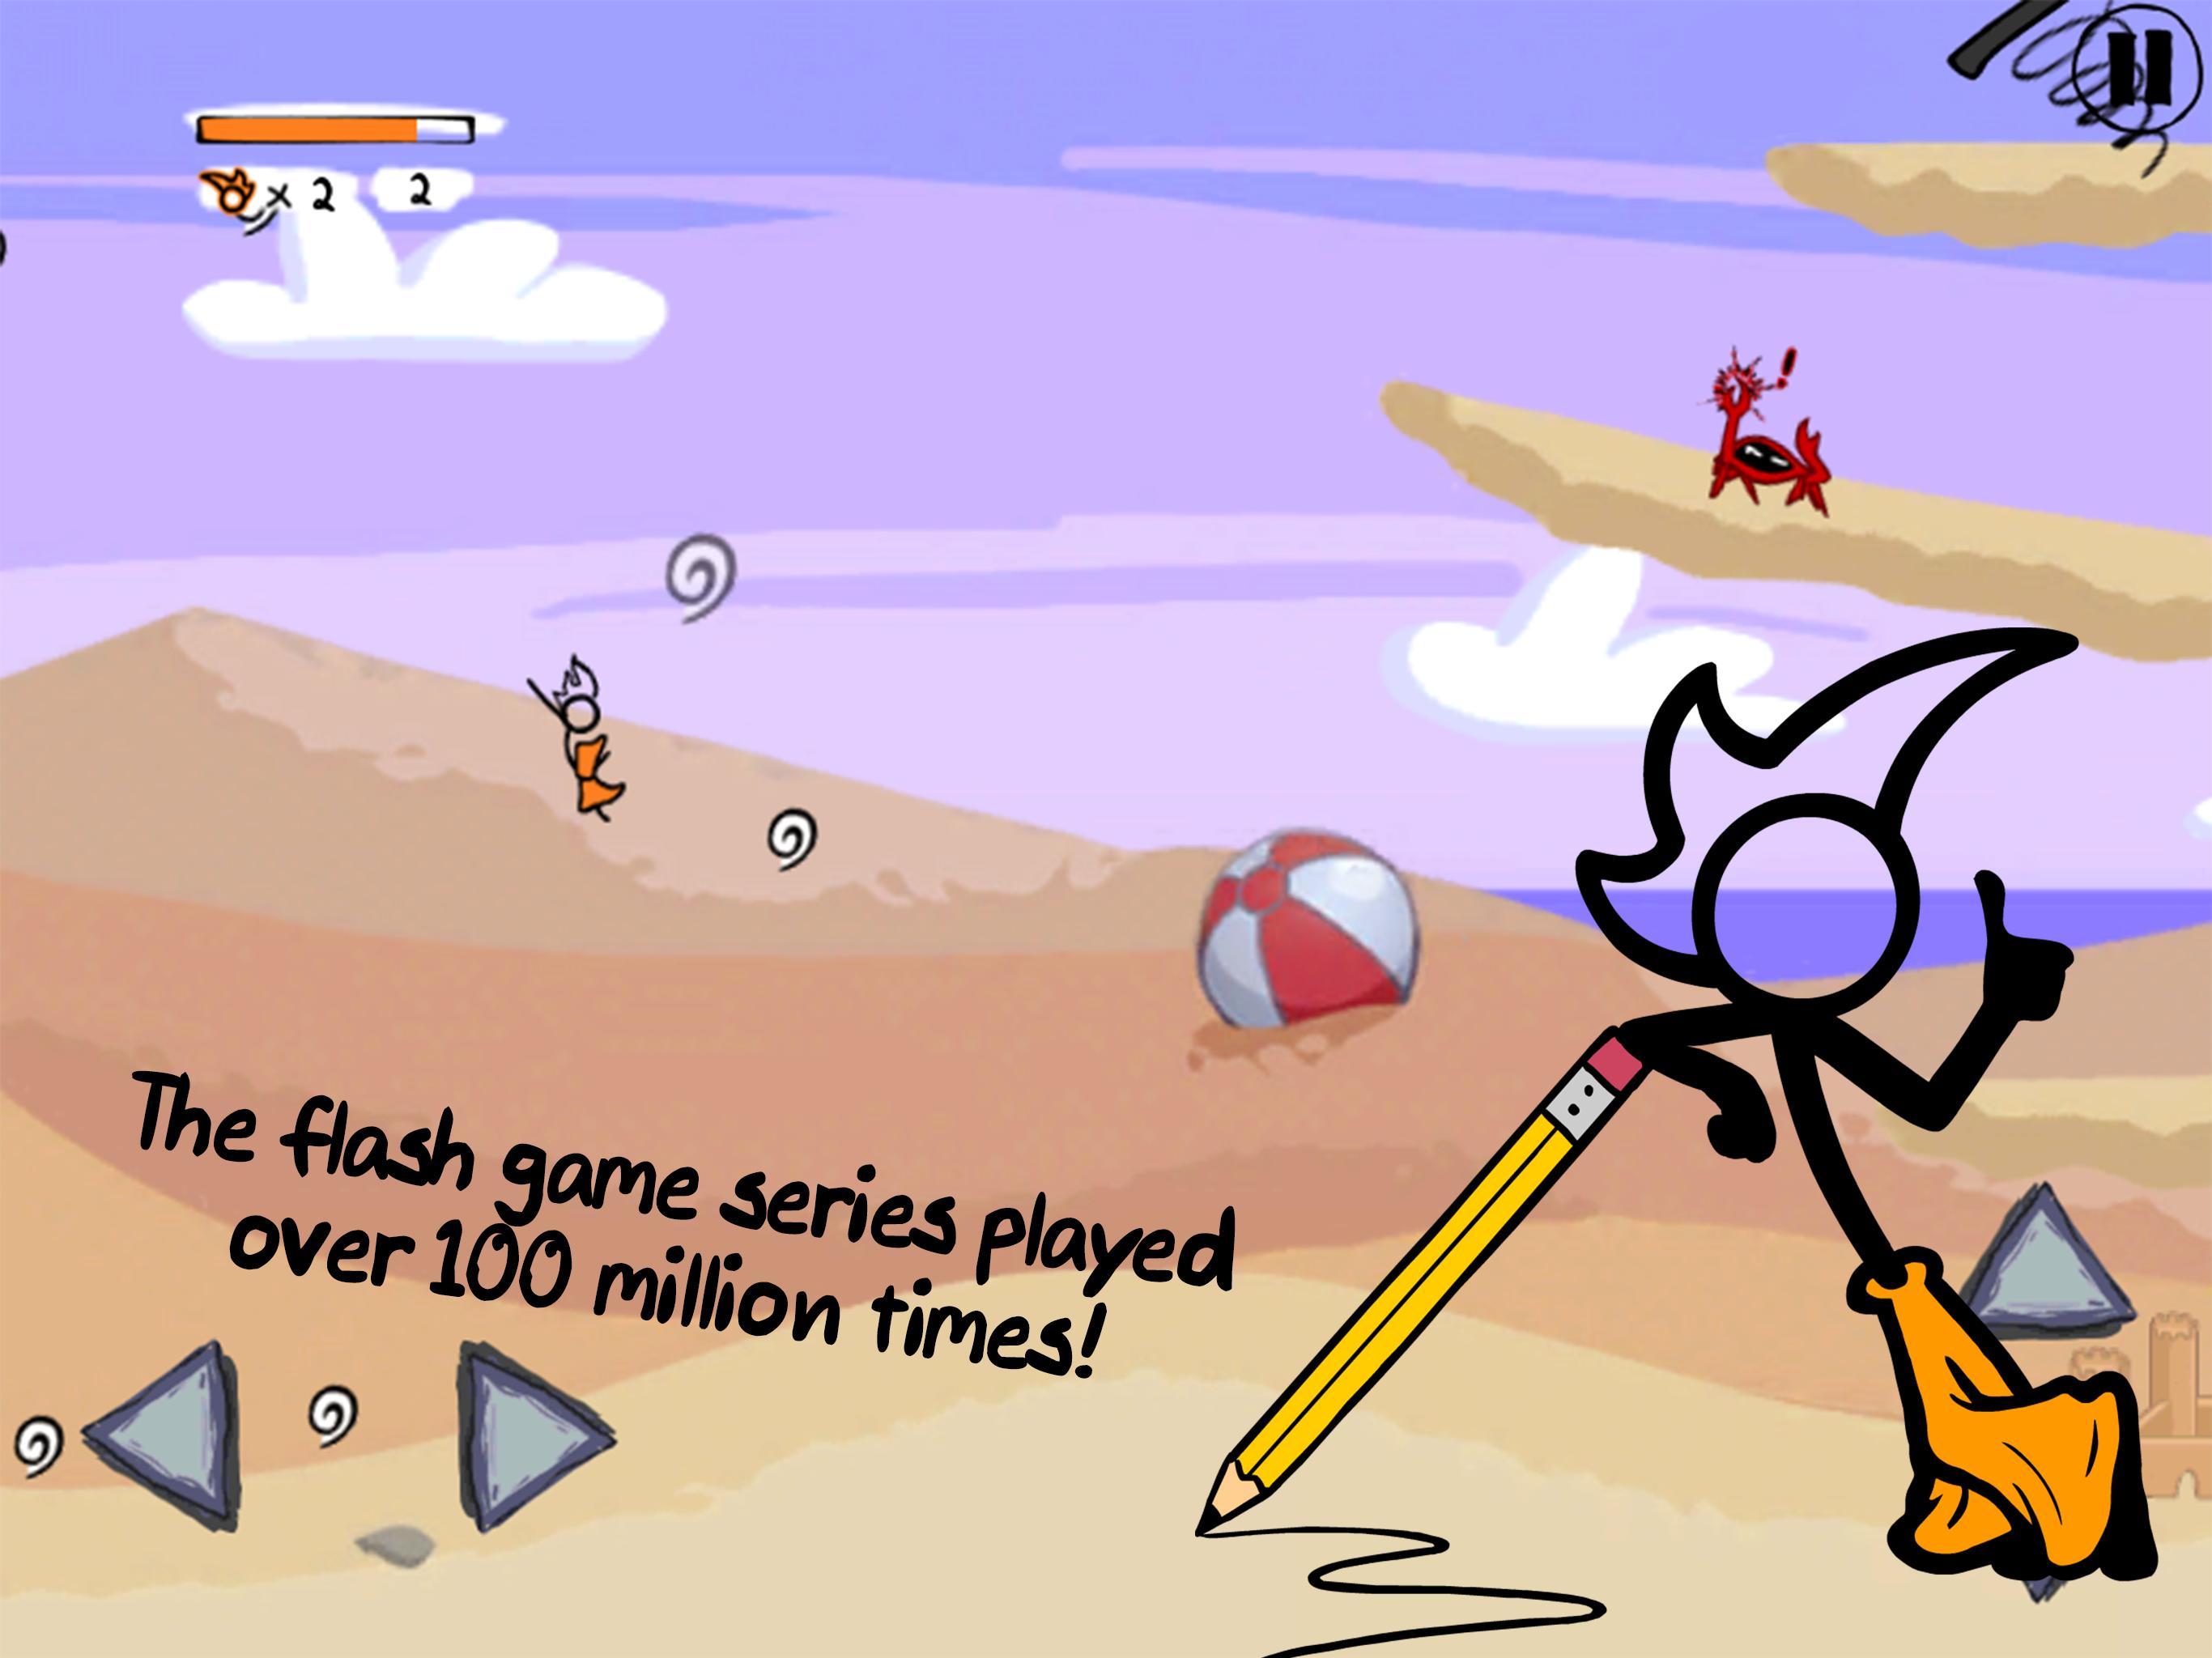 Fancy Pants for Android - APK Download